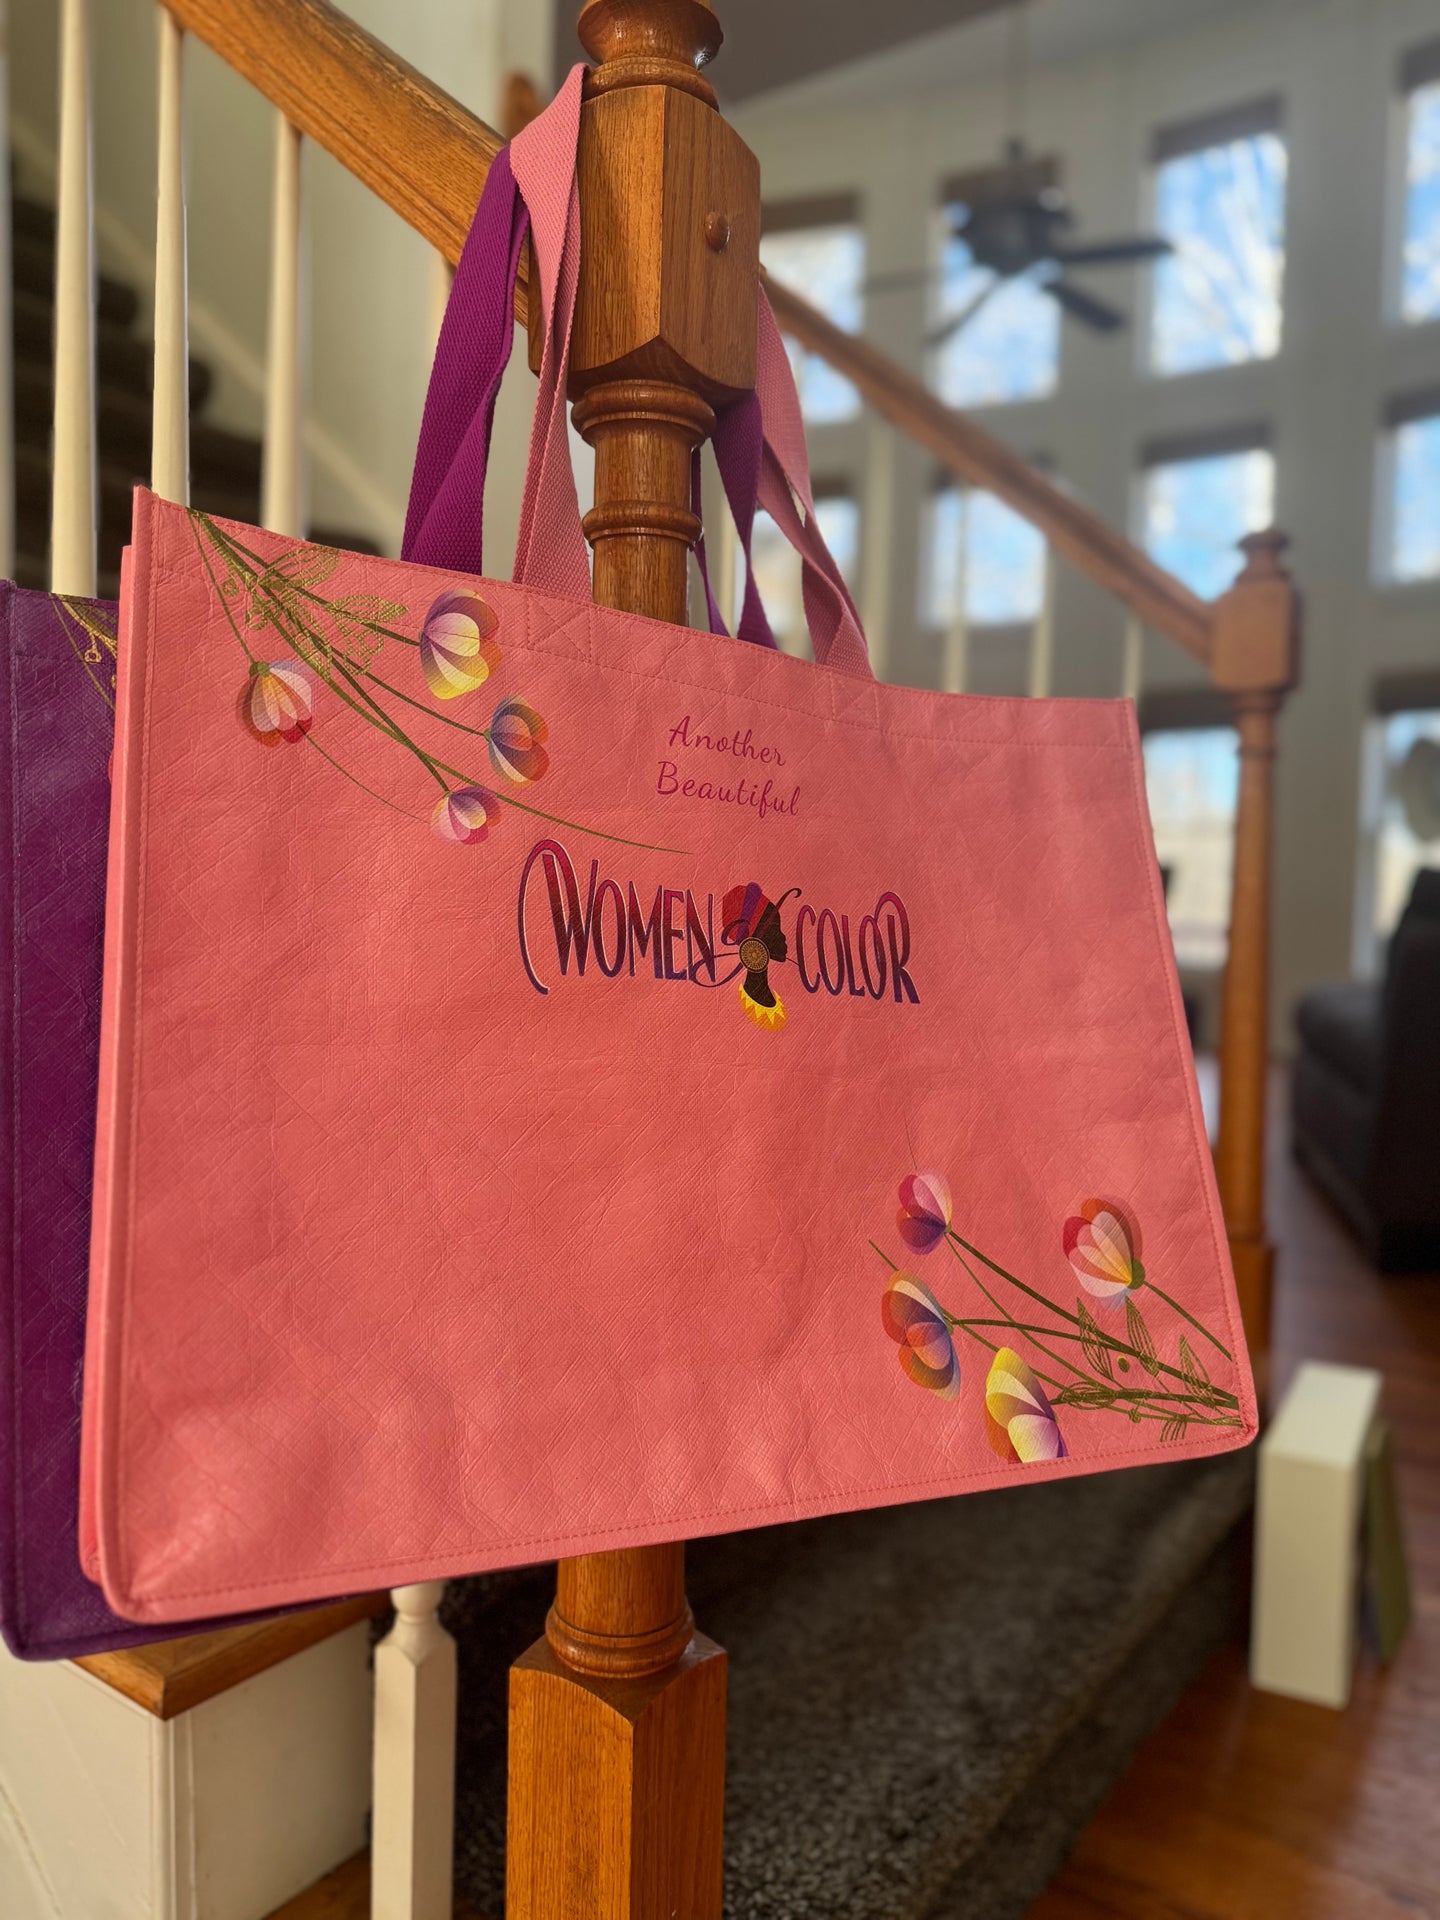 The New Women of Color PINK Tote Bag x 12